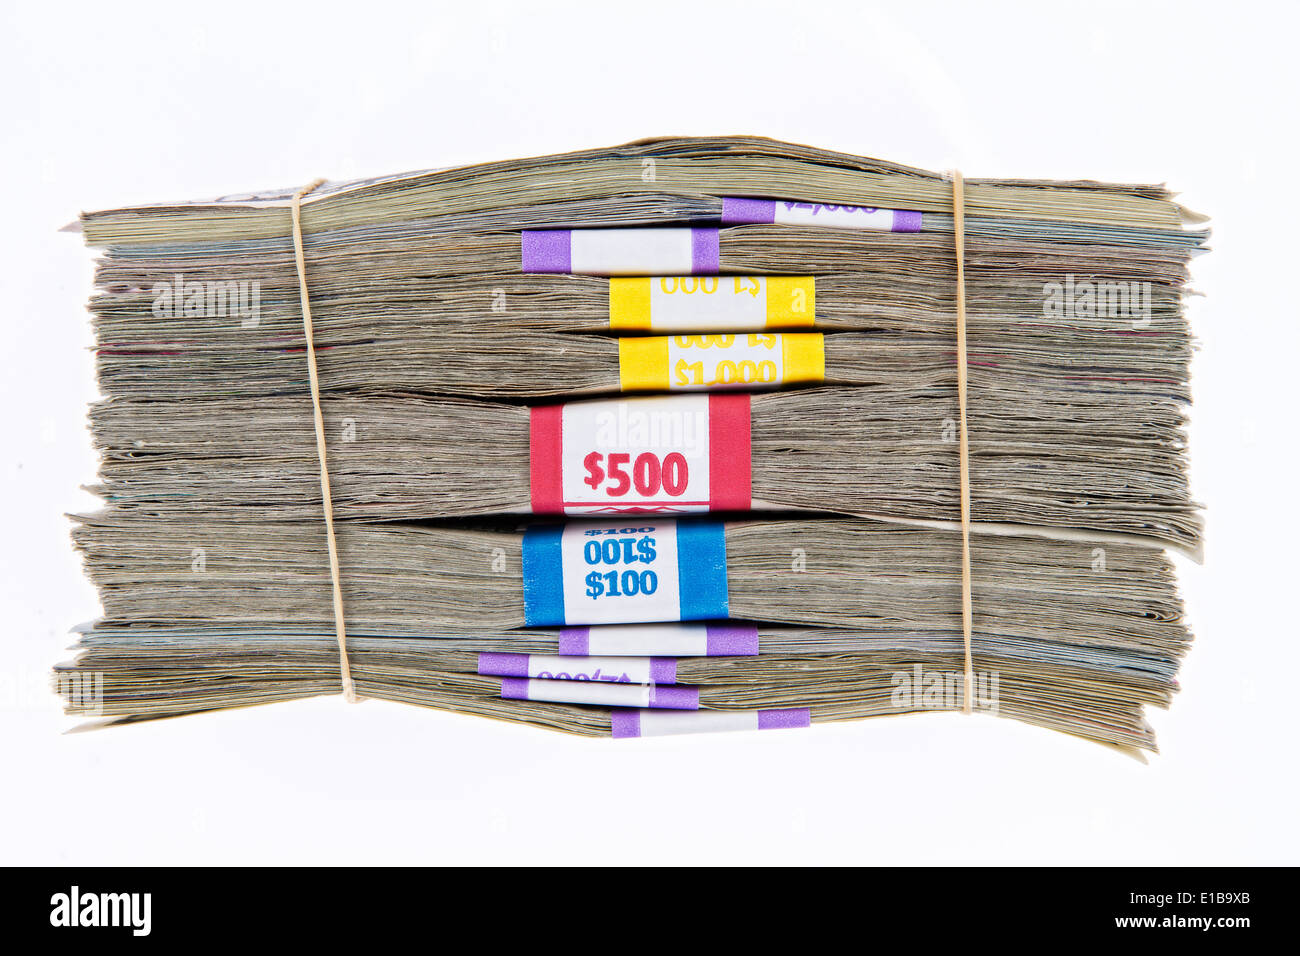 Bank bundles of different denomination dollar bills stacked on top of each other and secured with two rubber bands, side view Stock Photo